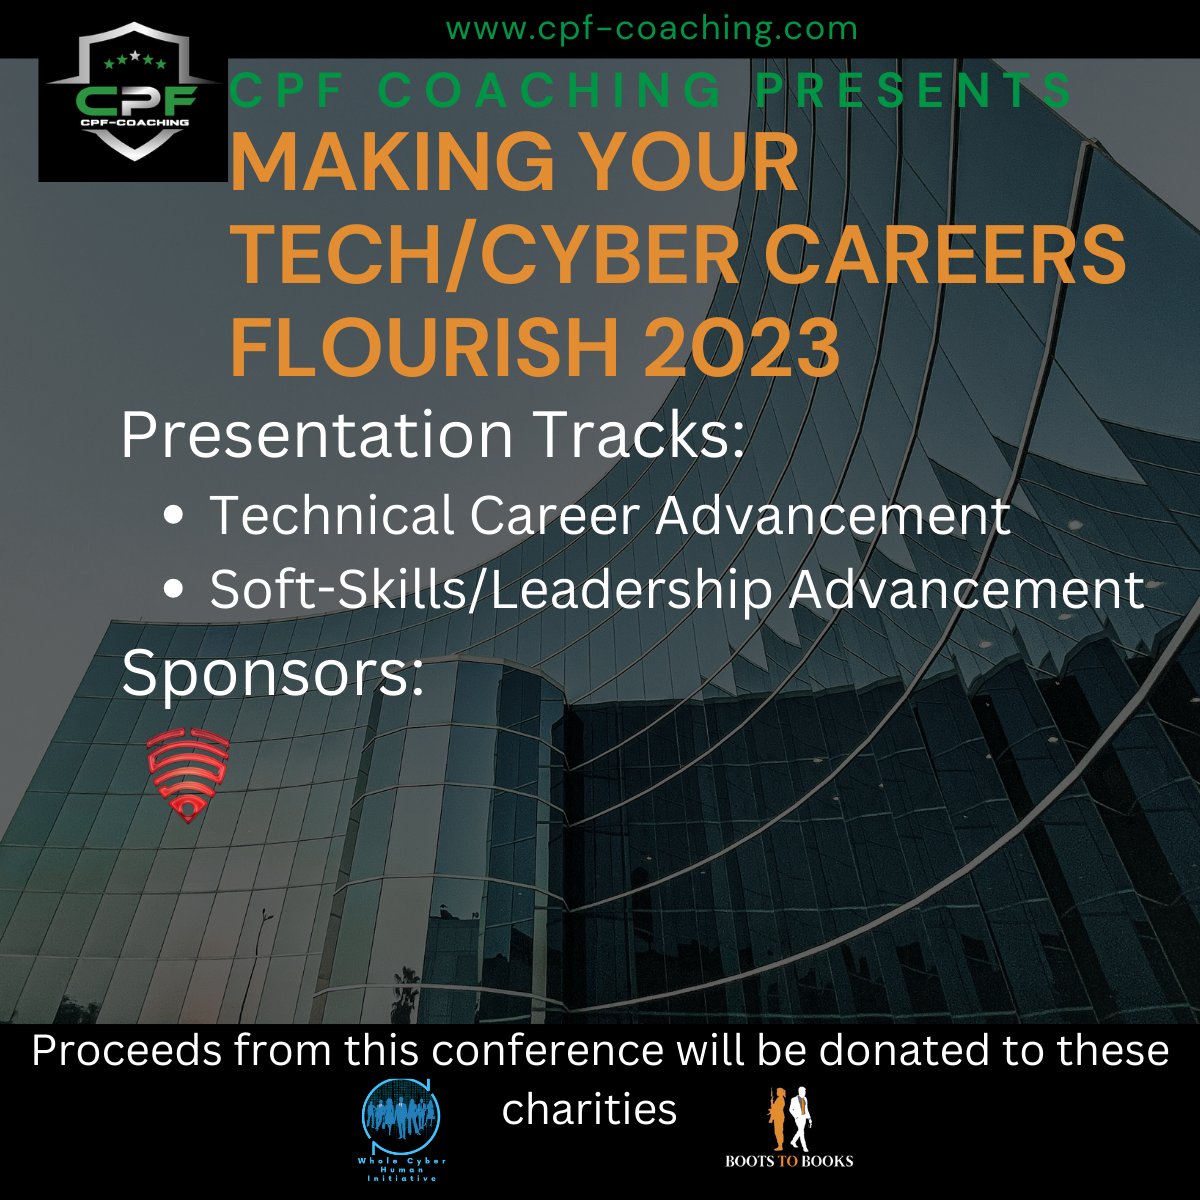 Tech and cyber professionals, don't miss out on our upcoming virtual conference, Making Your Tech/Cyber Careers Flourish 2023. Join us for valuable insights and strategies to help your career thrive in the coming year. Register now #techcareer #cybercareer buff.ly/3ZjlASO